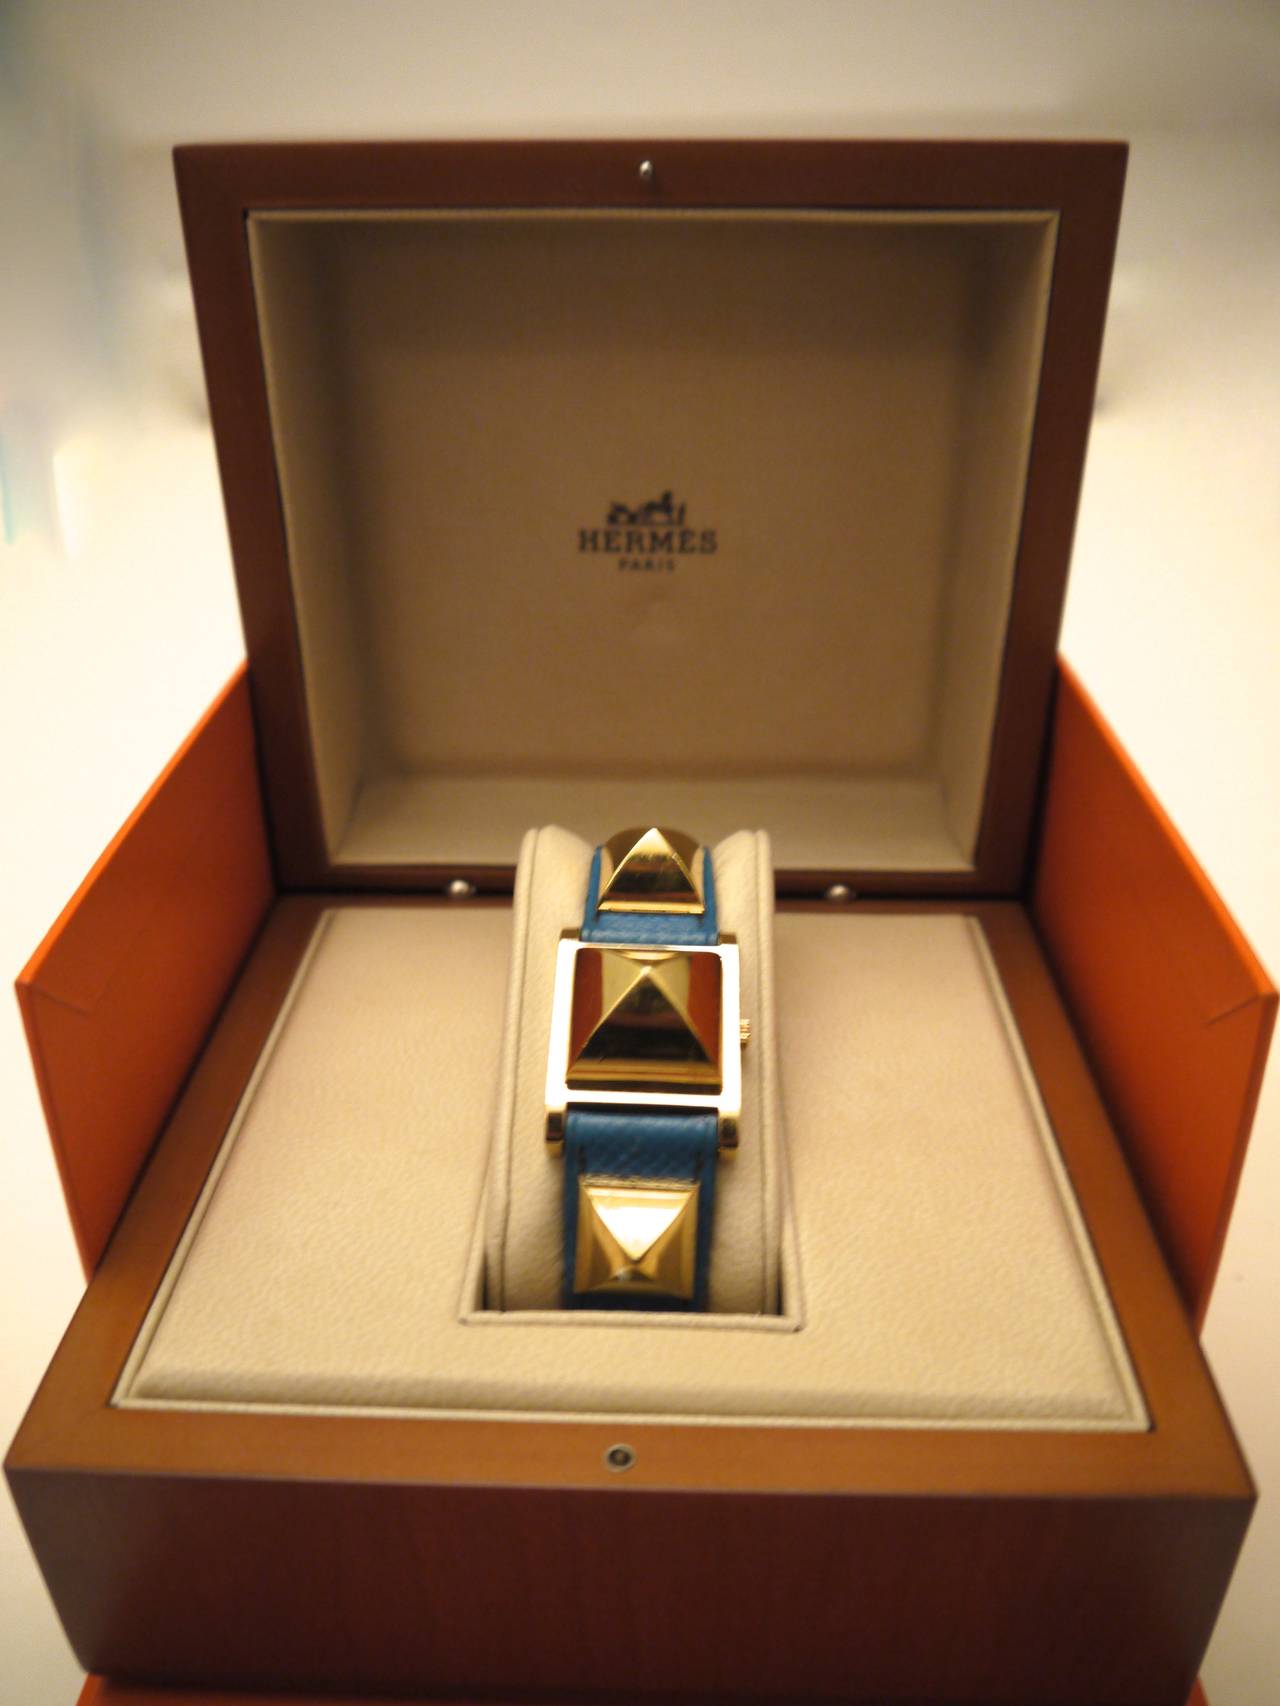 Hermes Medor Wrist Watch - Blue Strap with Gold Tone Hardware 2